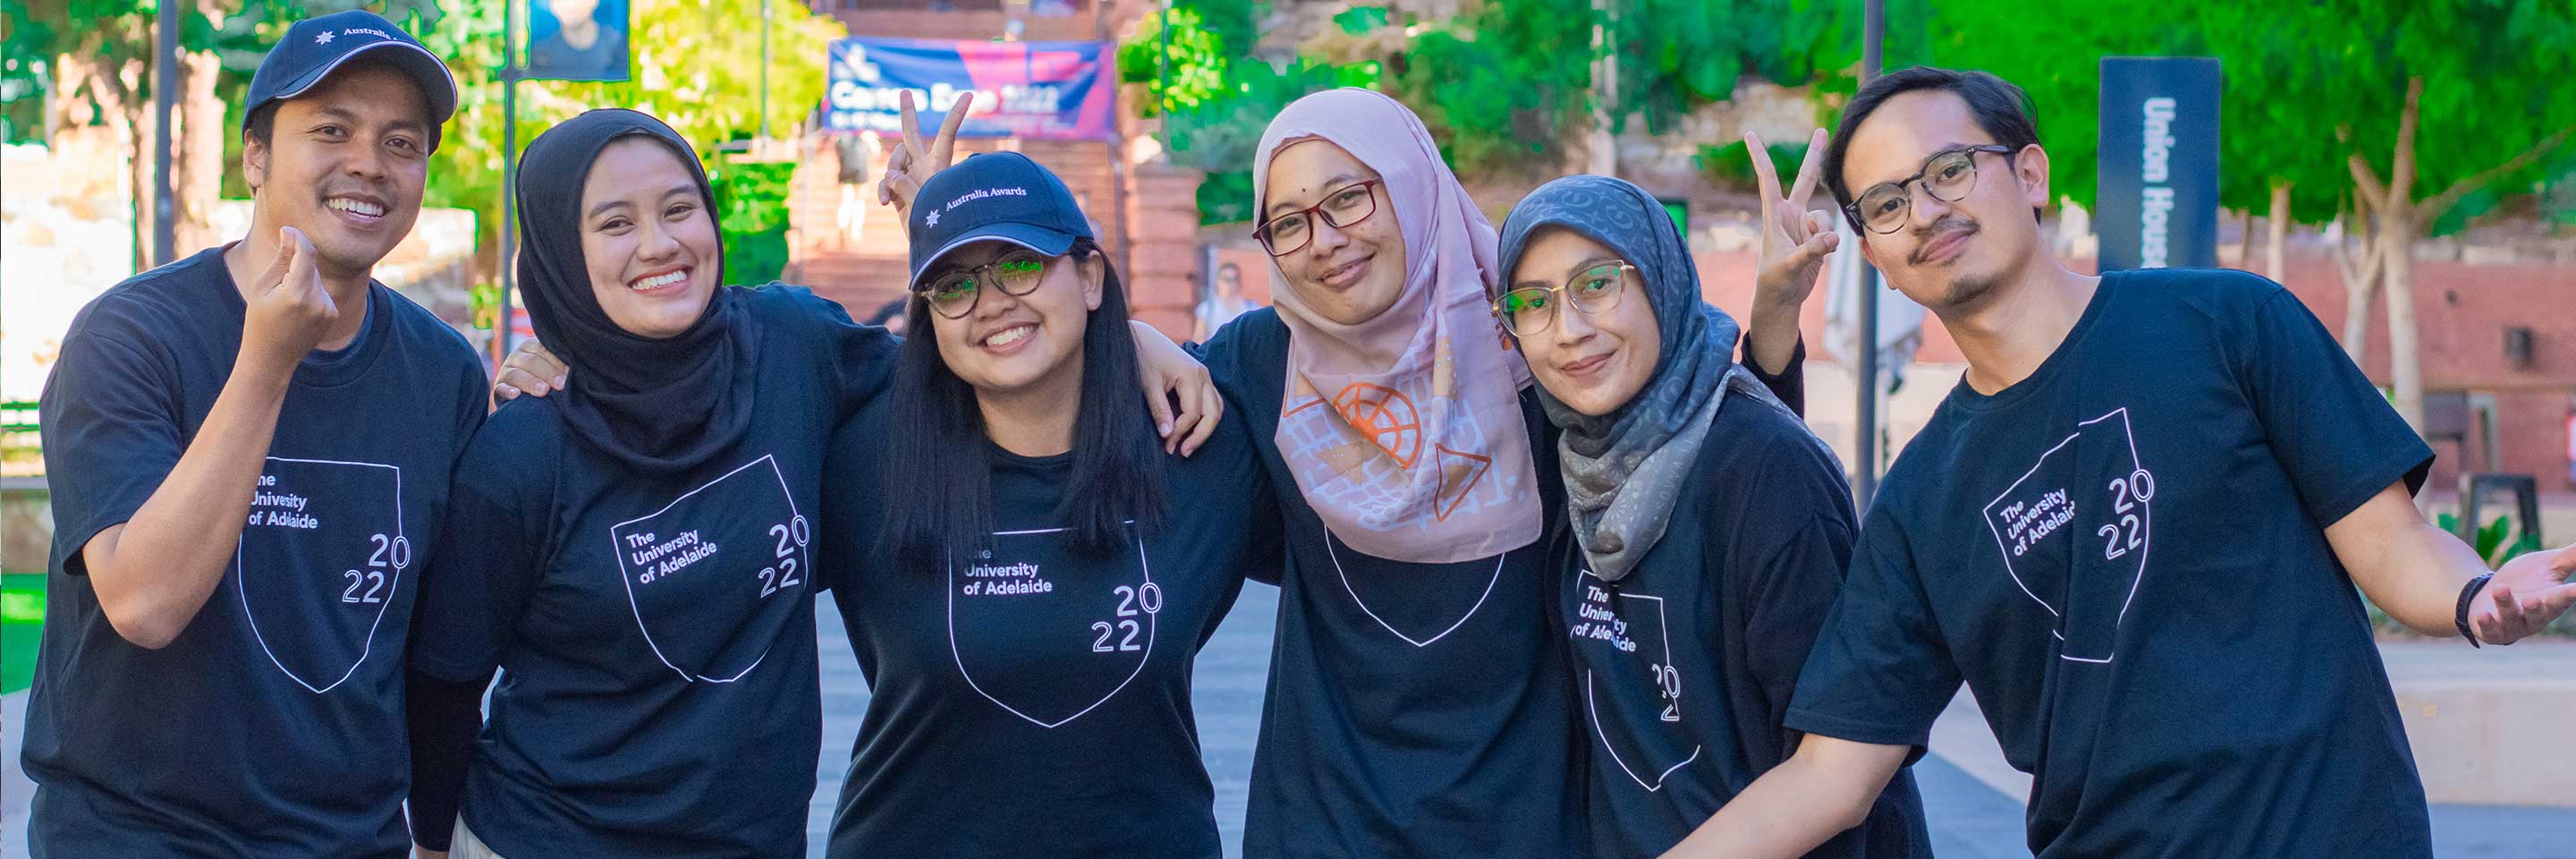 Scholarship recipients of the Split-Site Masters Program (SSMP) enjoy their time together in Australia. Through the SSMP, these change agents have the opportunity to spend a year studying at a university in Indonesia, and another year at a university in A